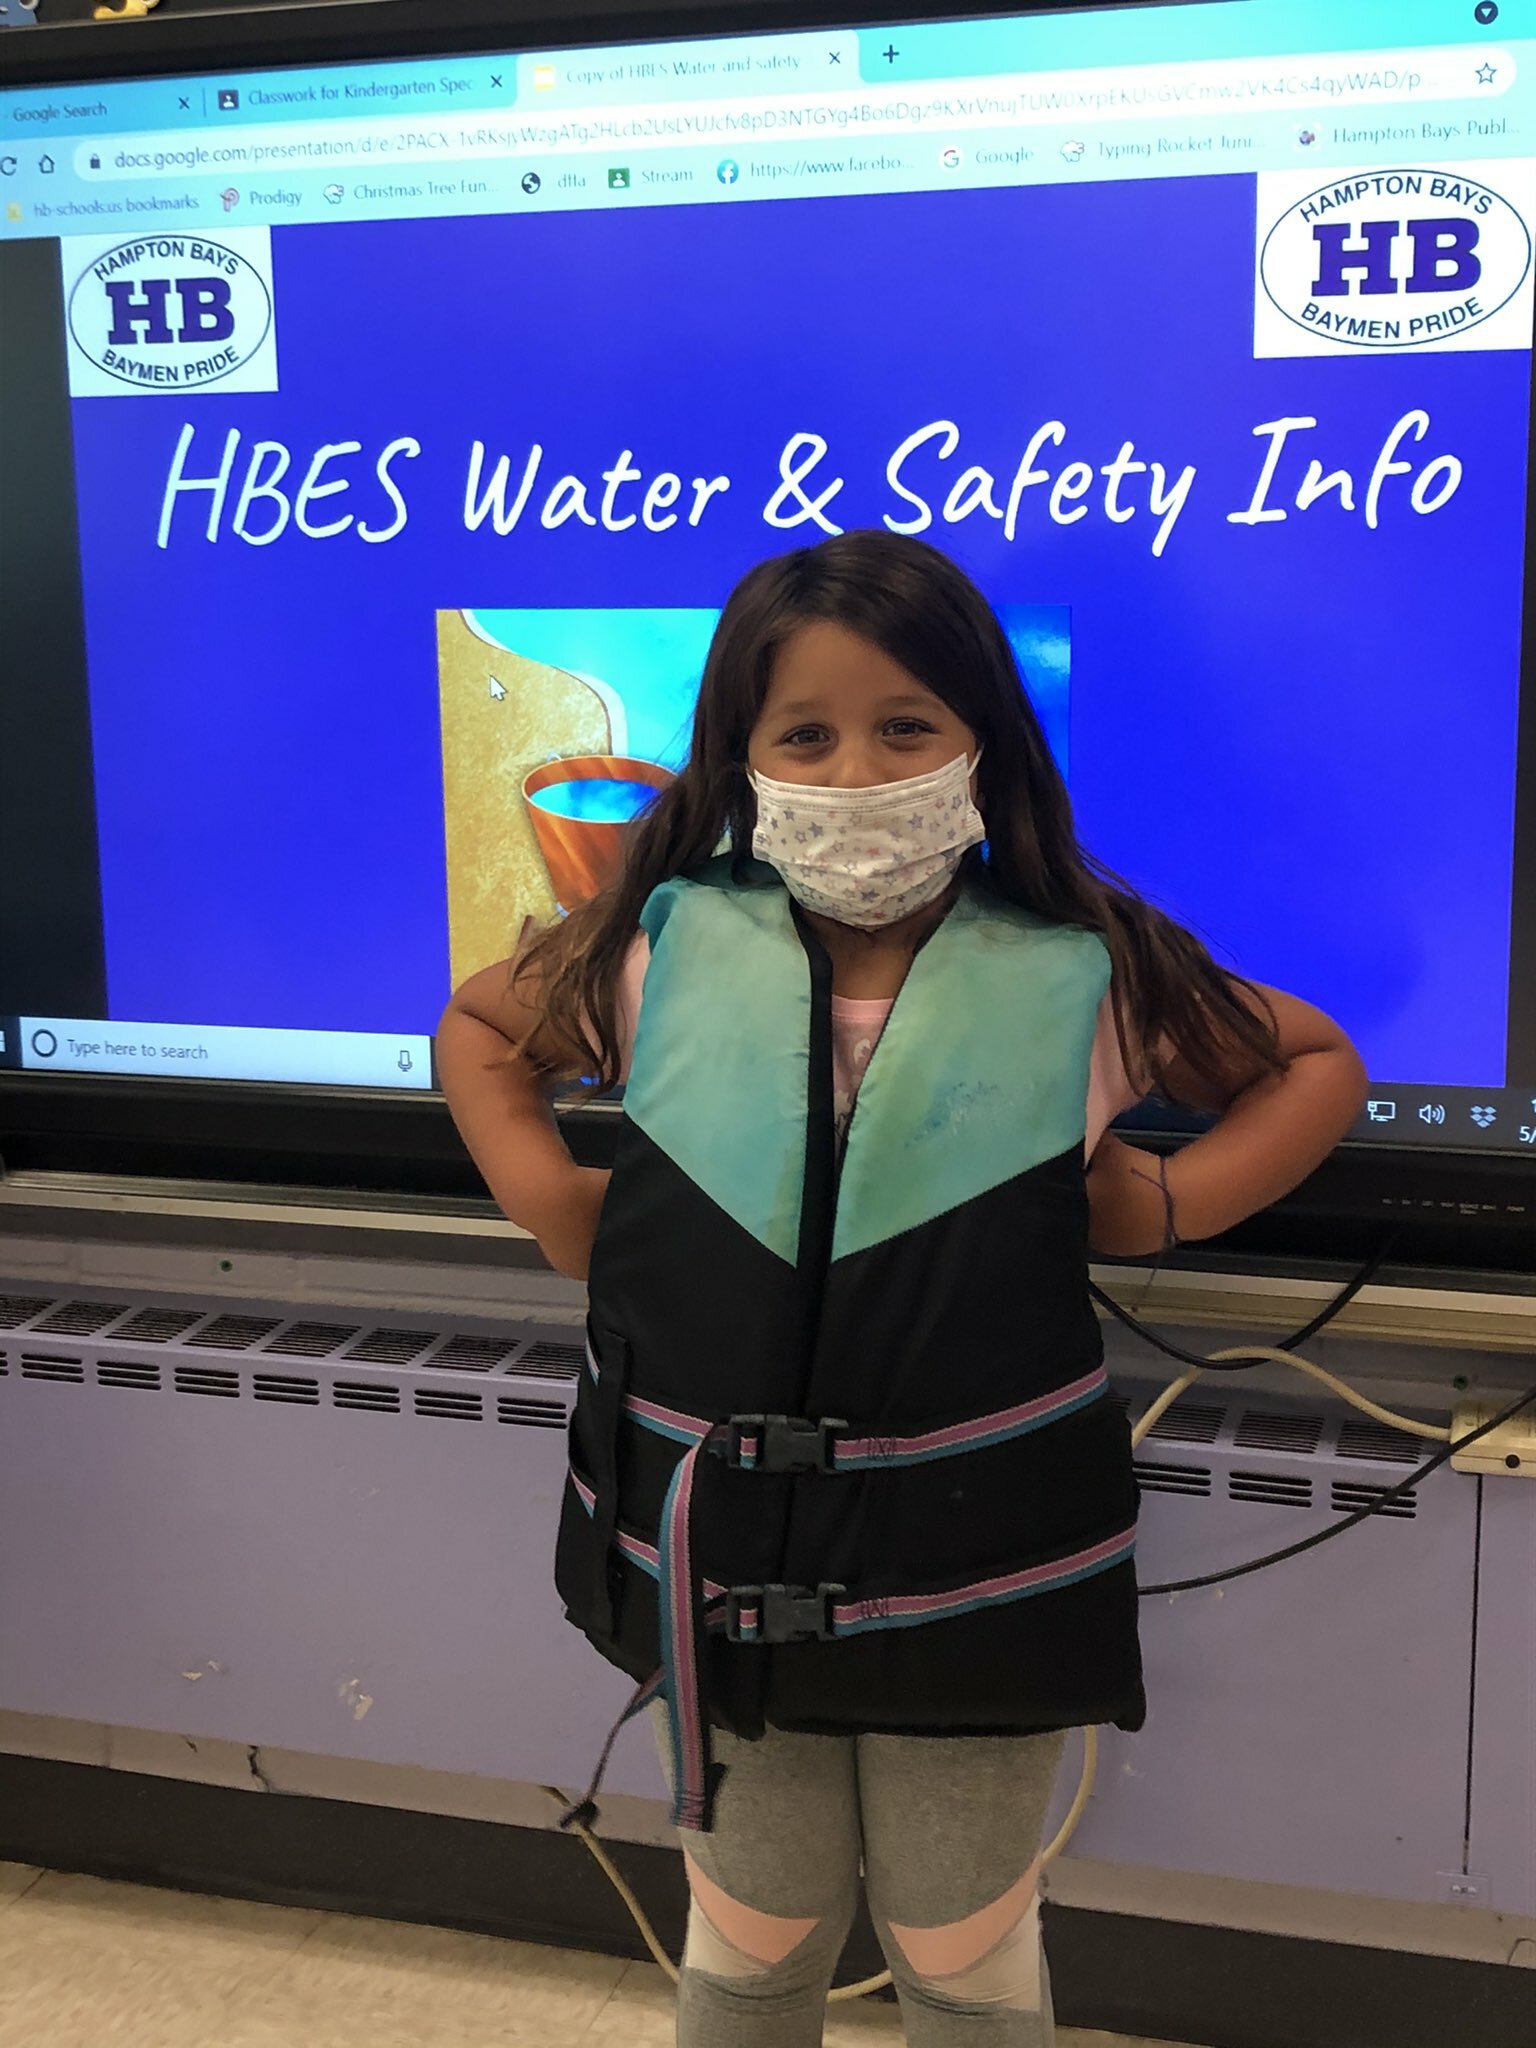 Students at Hampton Bays Elementary School received special lessons on boat and water safety through the Dominic Trionfo Memorial Fund. The nonprofit provided a variety of learning materials, including activity books and classroom kits, and engaged students in discussions about bike safety, tick safety, the importance of sunscreen and staying hydrated.